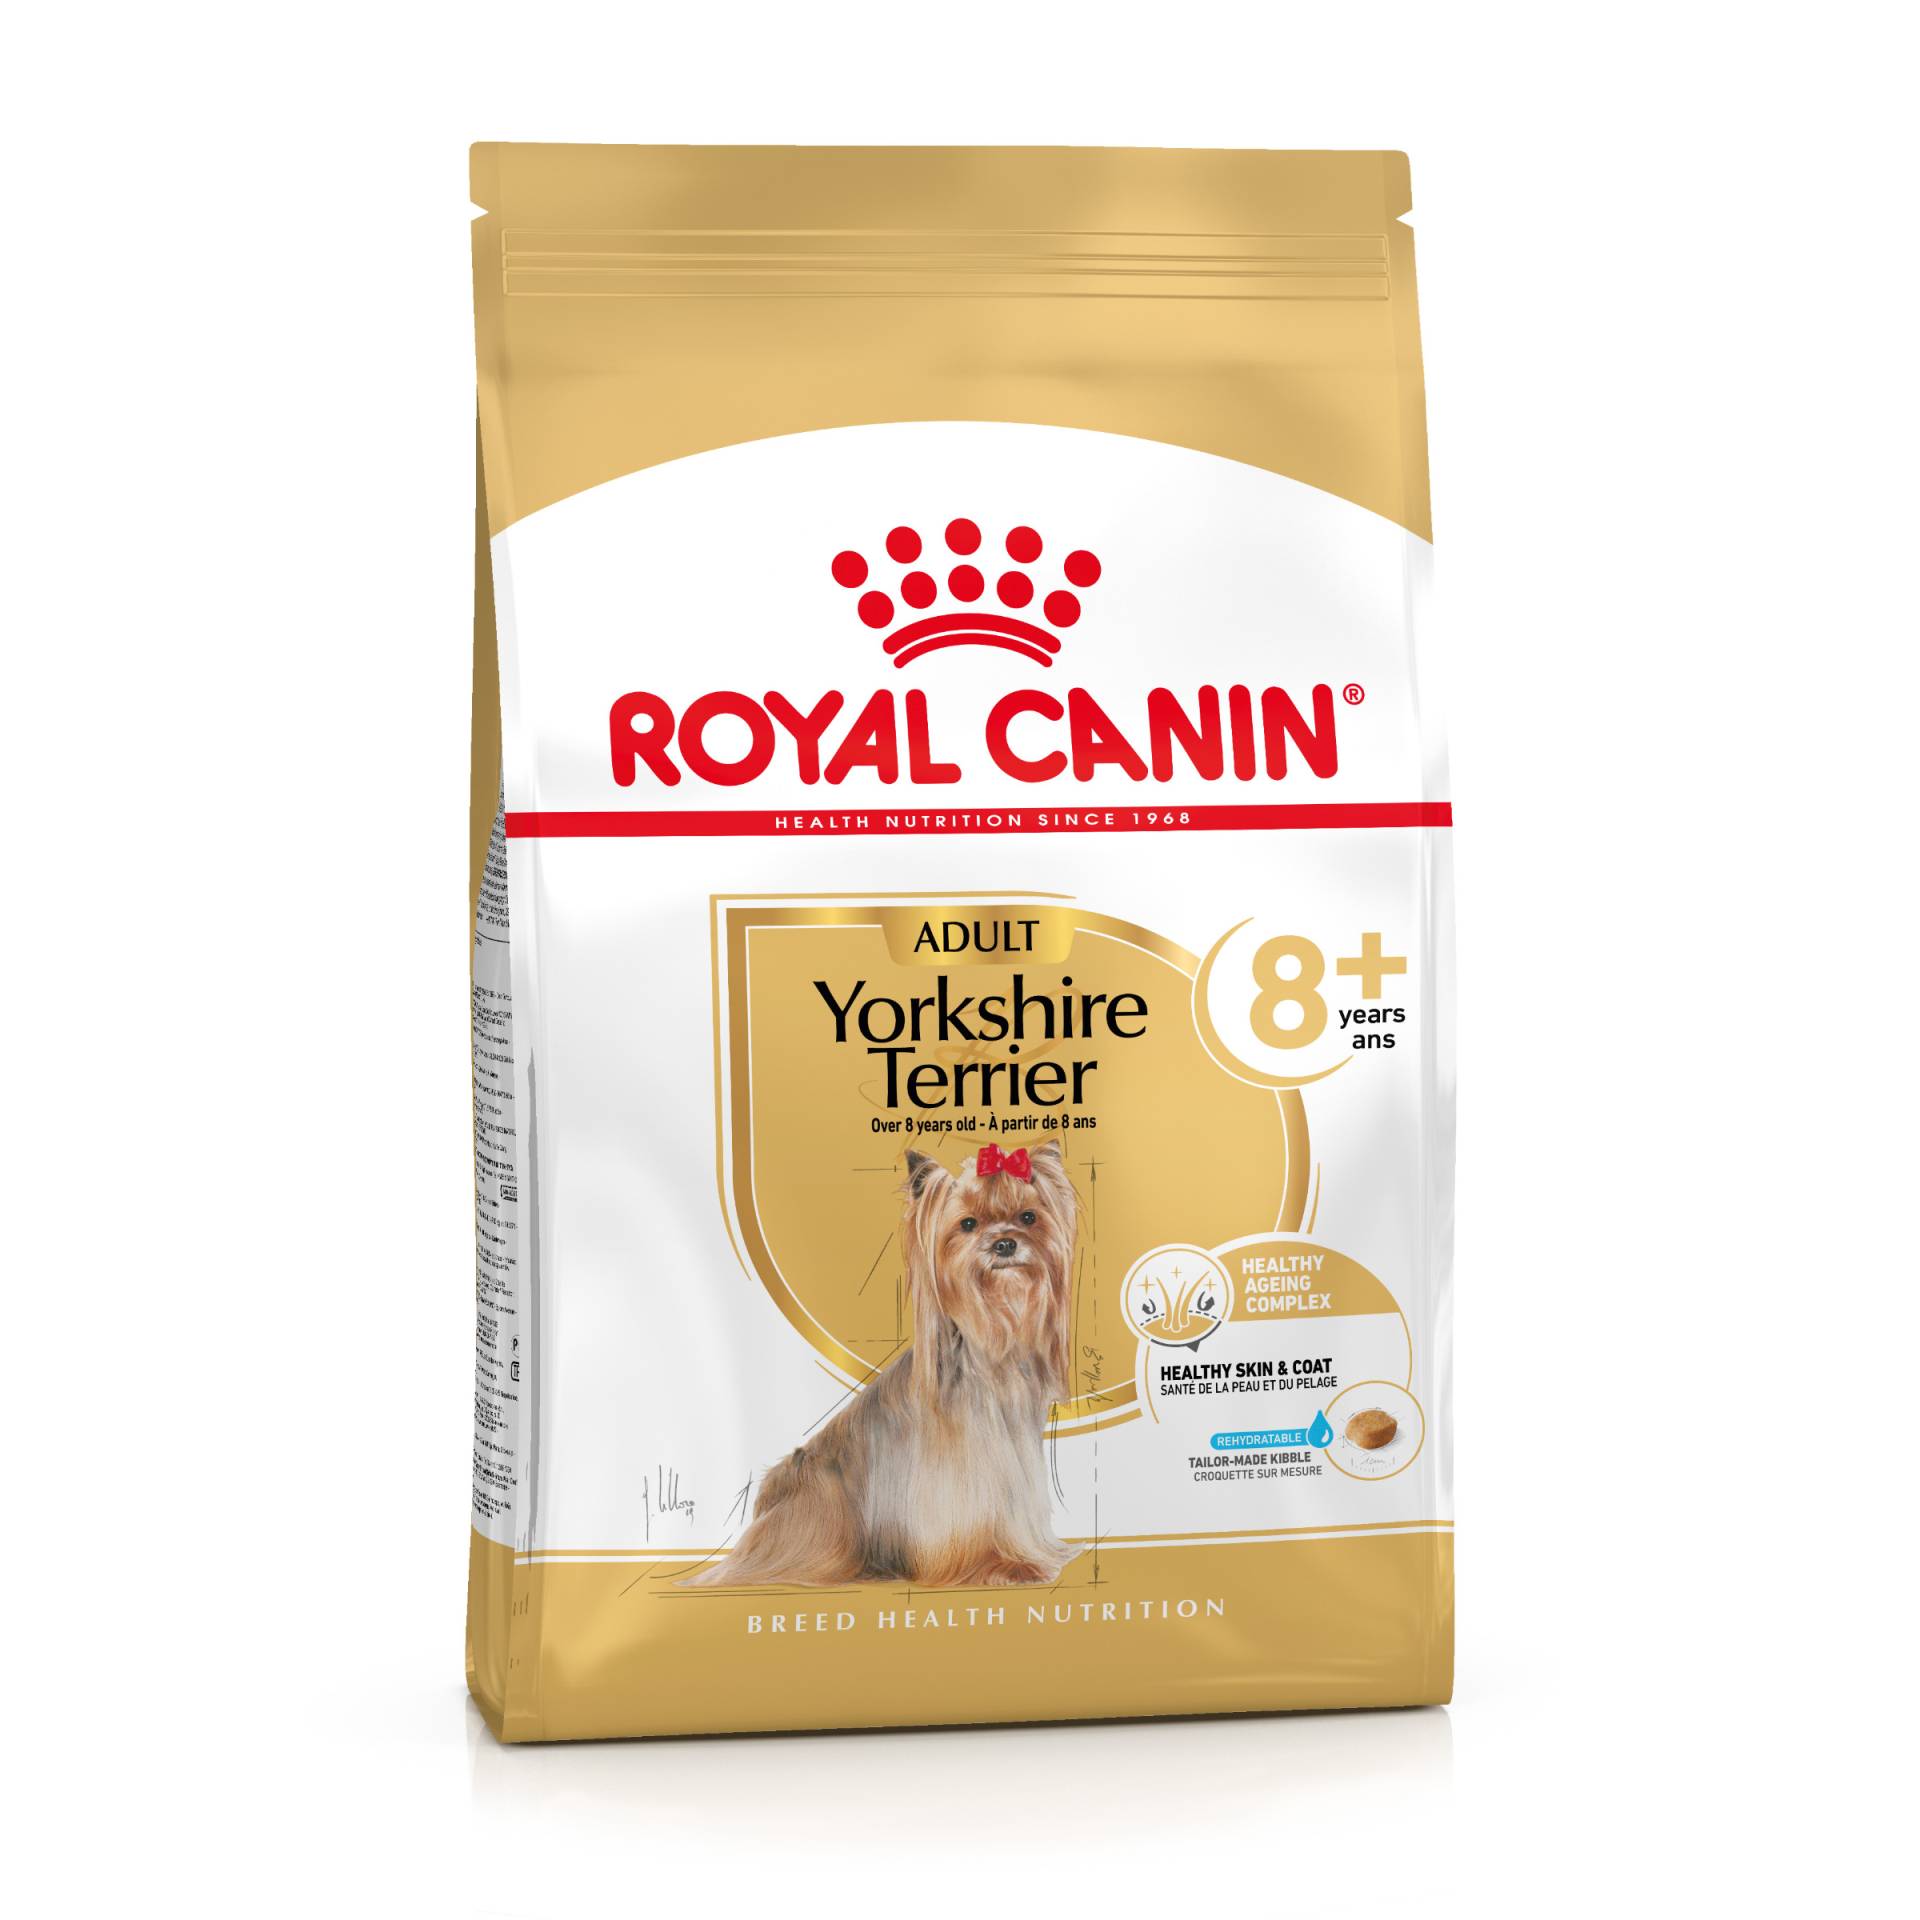 Royal Canin Yorkshire Terrier Adult 8+ - Sparpaket: 2 x 3 kg von Royal Canin Breed